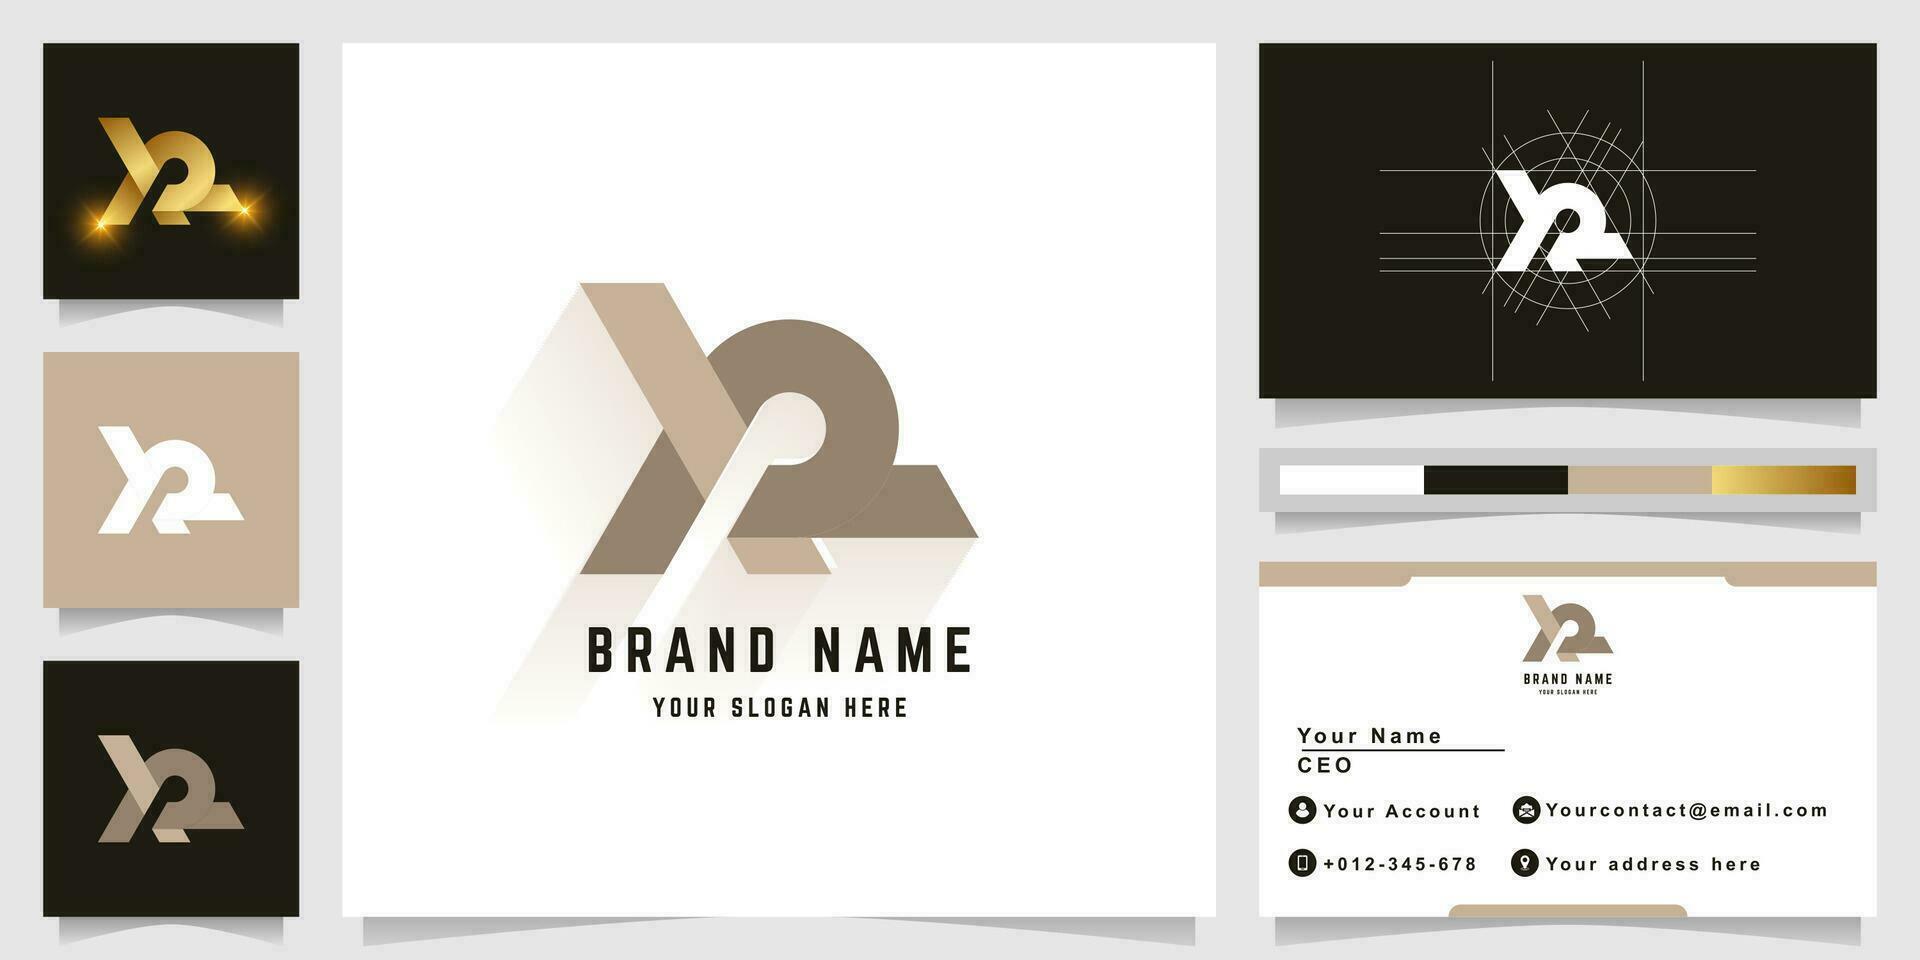 Letter XR or YR monogram logo with business card design vector